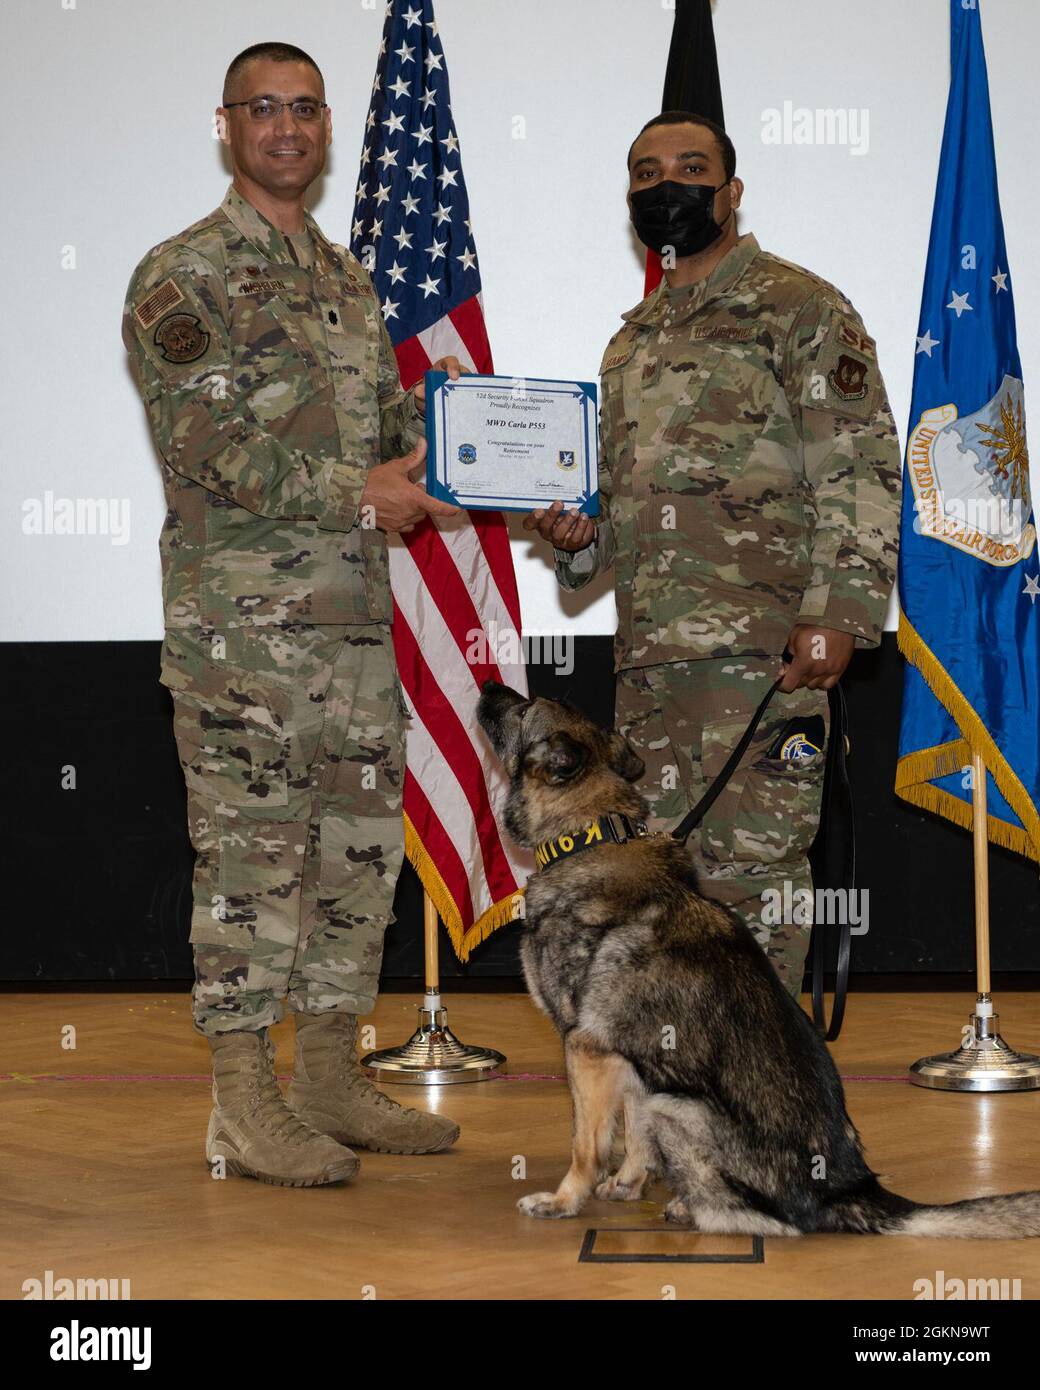 U.S. Air Force Lt. Col. Ben Washburn, 52nd Security Forces Squadron commander (left), and Tech. Sgt. Dontae Stamps, 52nd SFS kennel master, pose for a photo with Military Working Dog Carla during her retirement ceremony at the base theater on Spangdahlem Air Base, Germany, June 3, 2021. Throughout her 11 years stationed at Spangdahlem AB, MWD Carla, a patrol and explosives detector dog, deployed twice and served on countless U.S. Secret Service missions protecting high-ranking U.S. Government officials. Stock Photo